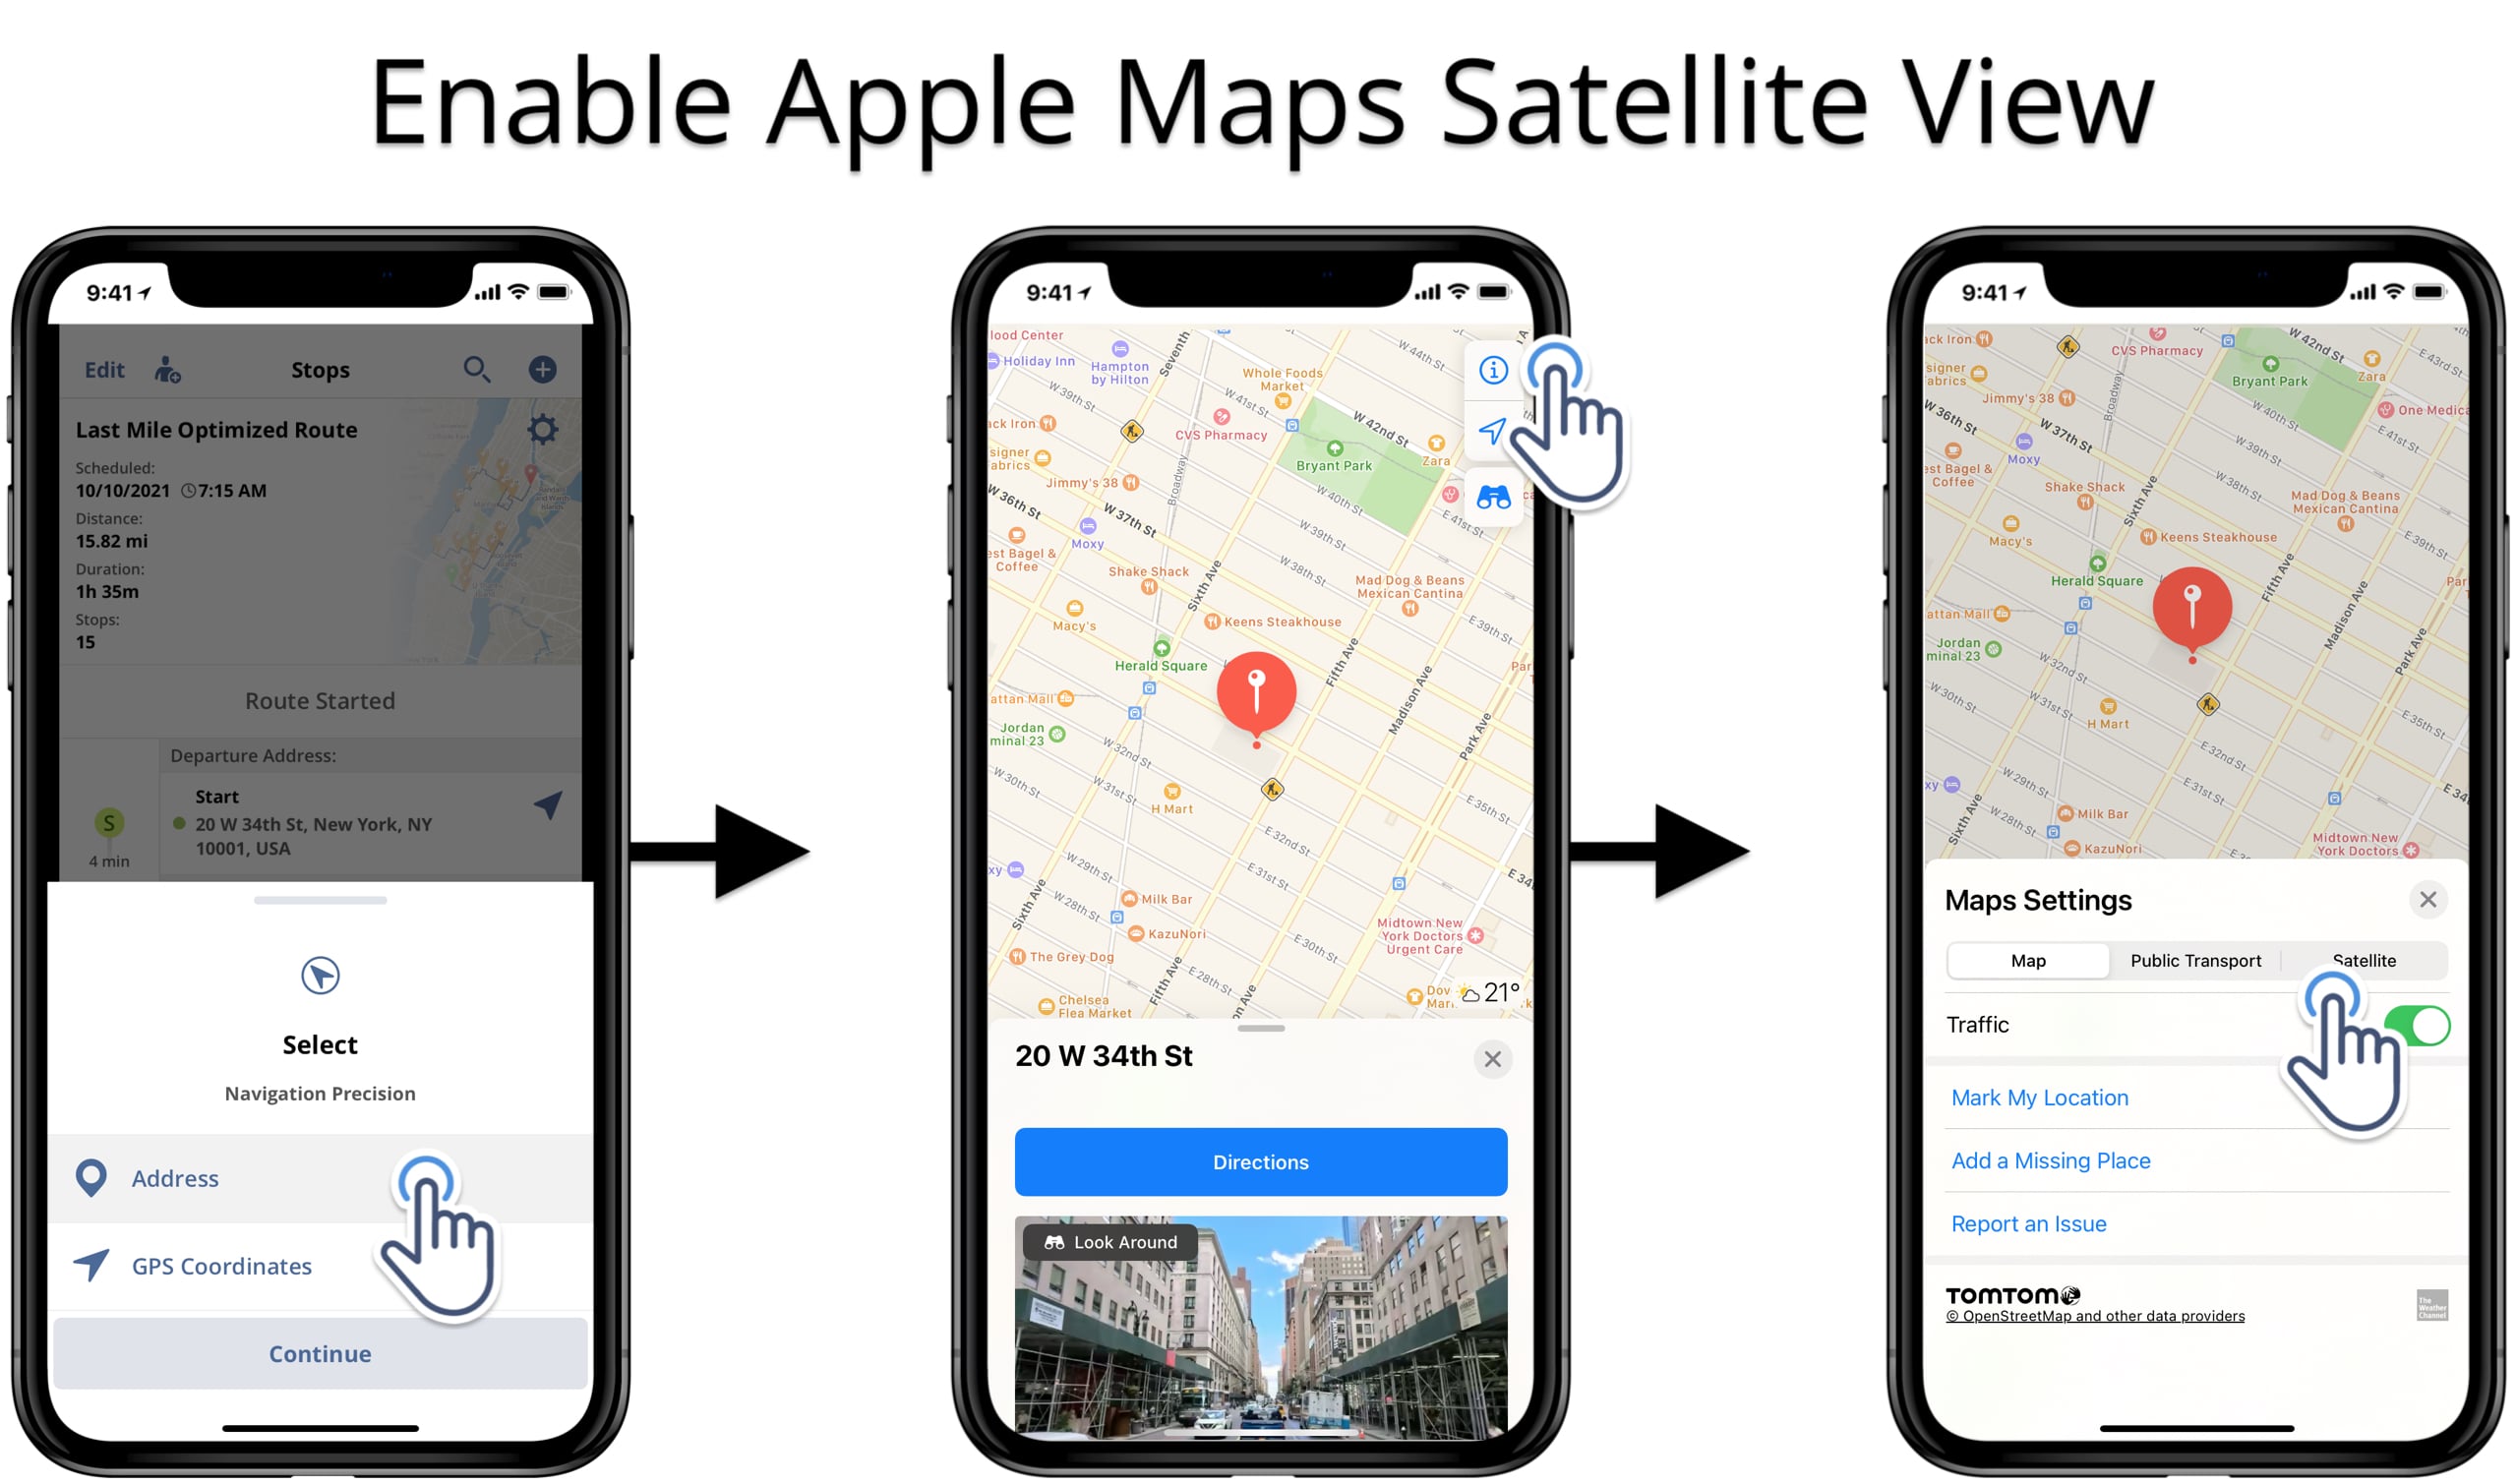 Enable Apple Maps satellite view for route planner route destinations.